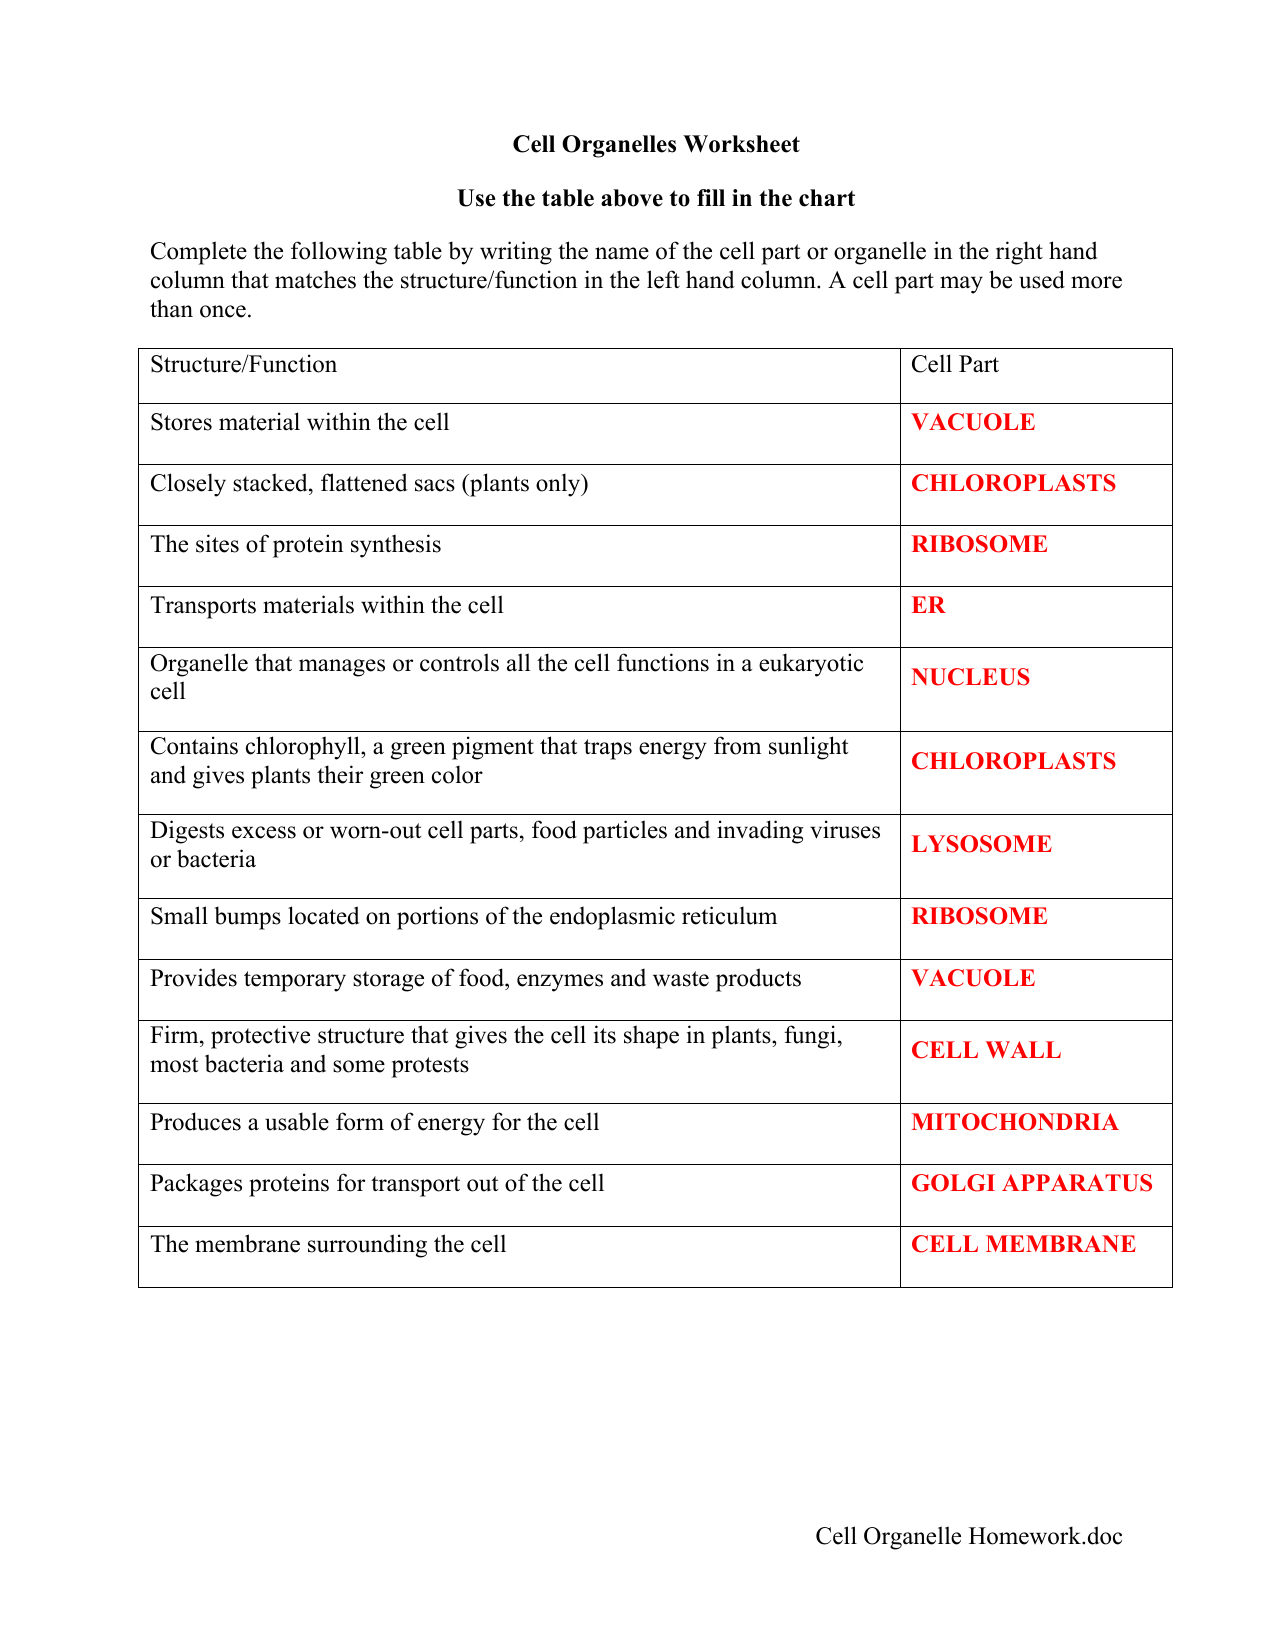 Cell Organelle Homeworkdoc Cell Organelles Worksheet Pertaining To Cell Parts And Functions Worksheet Answers